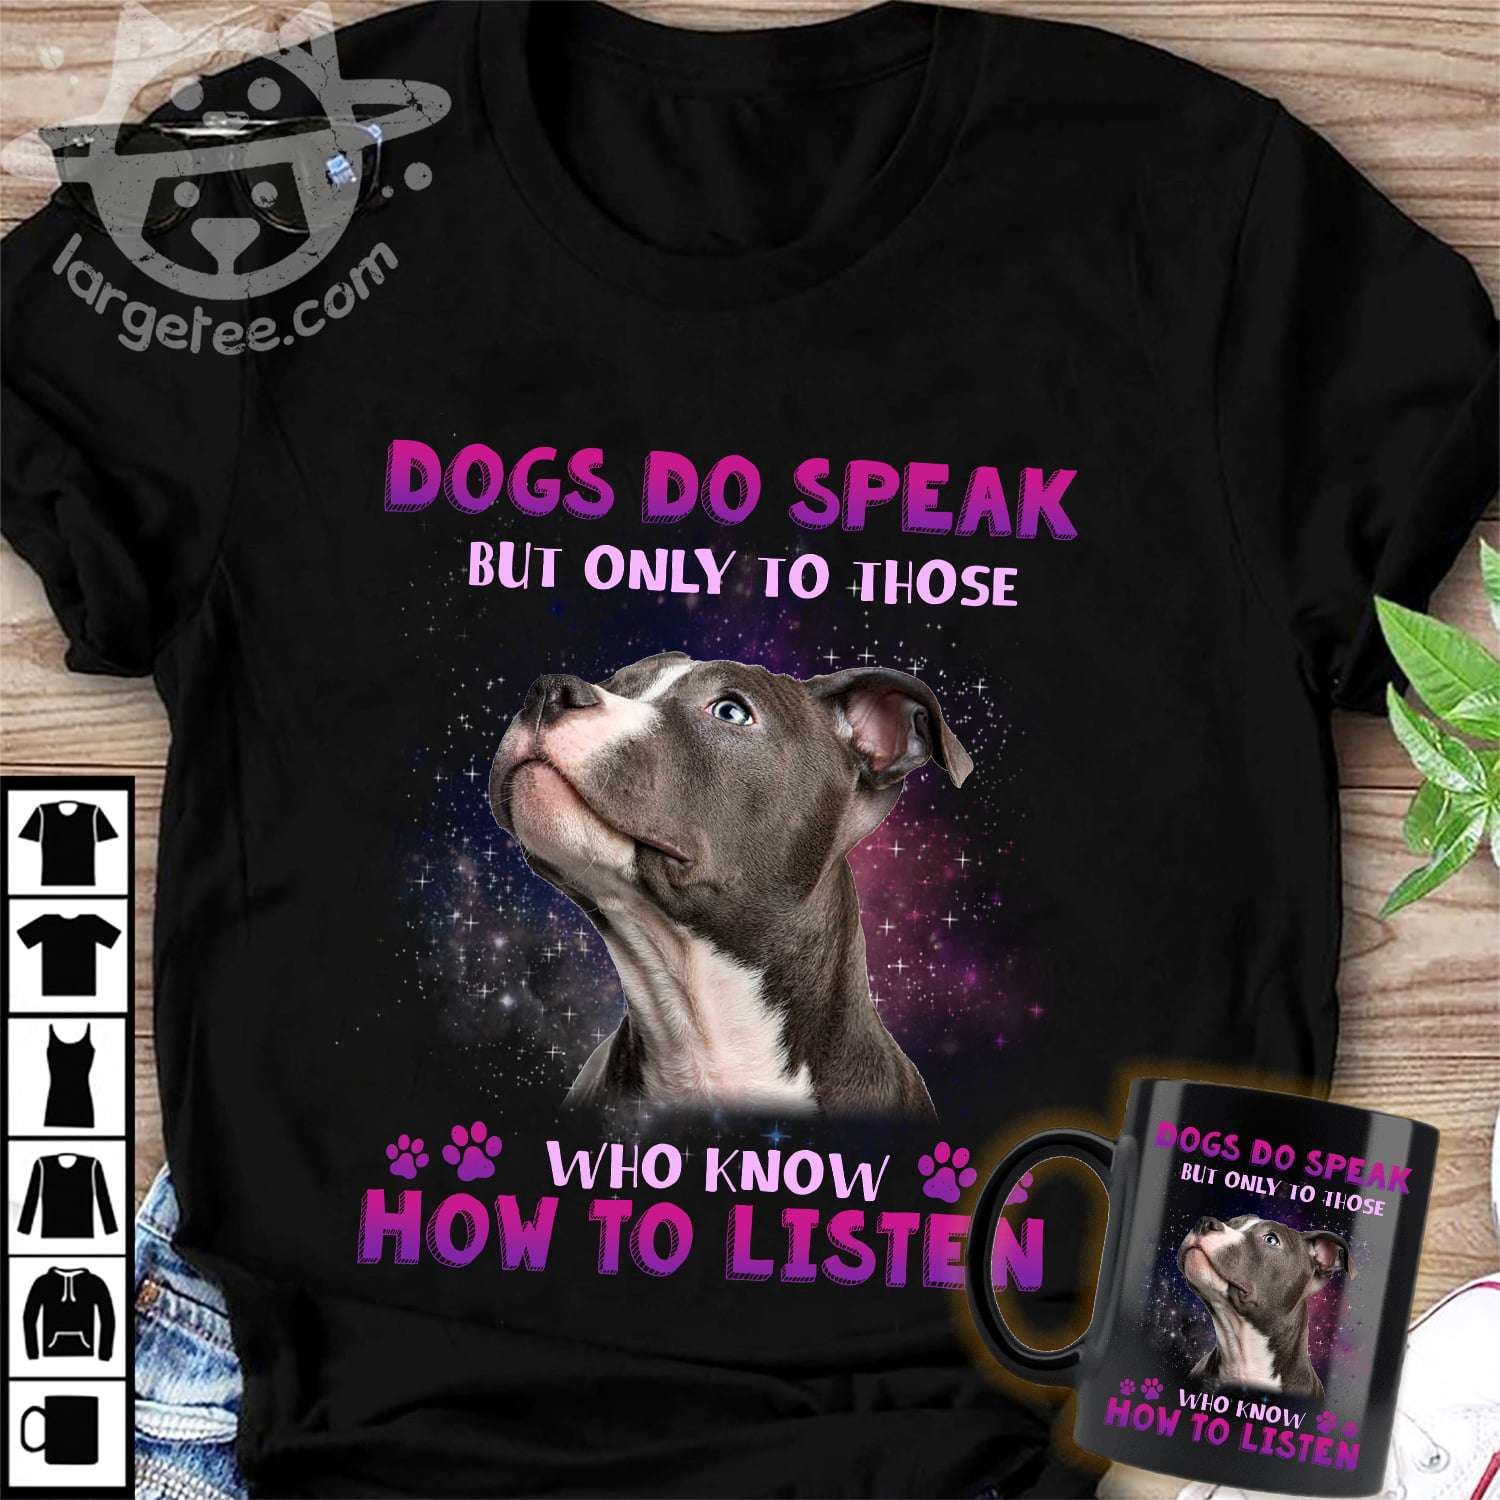 Dogs do speak but only to those who know how to listen - Pitbull dog graphic T-shirt, dog owner's gift